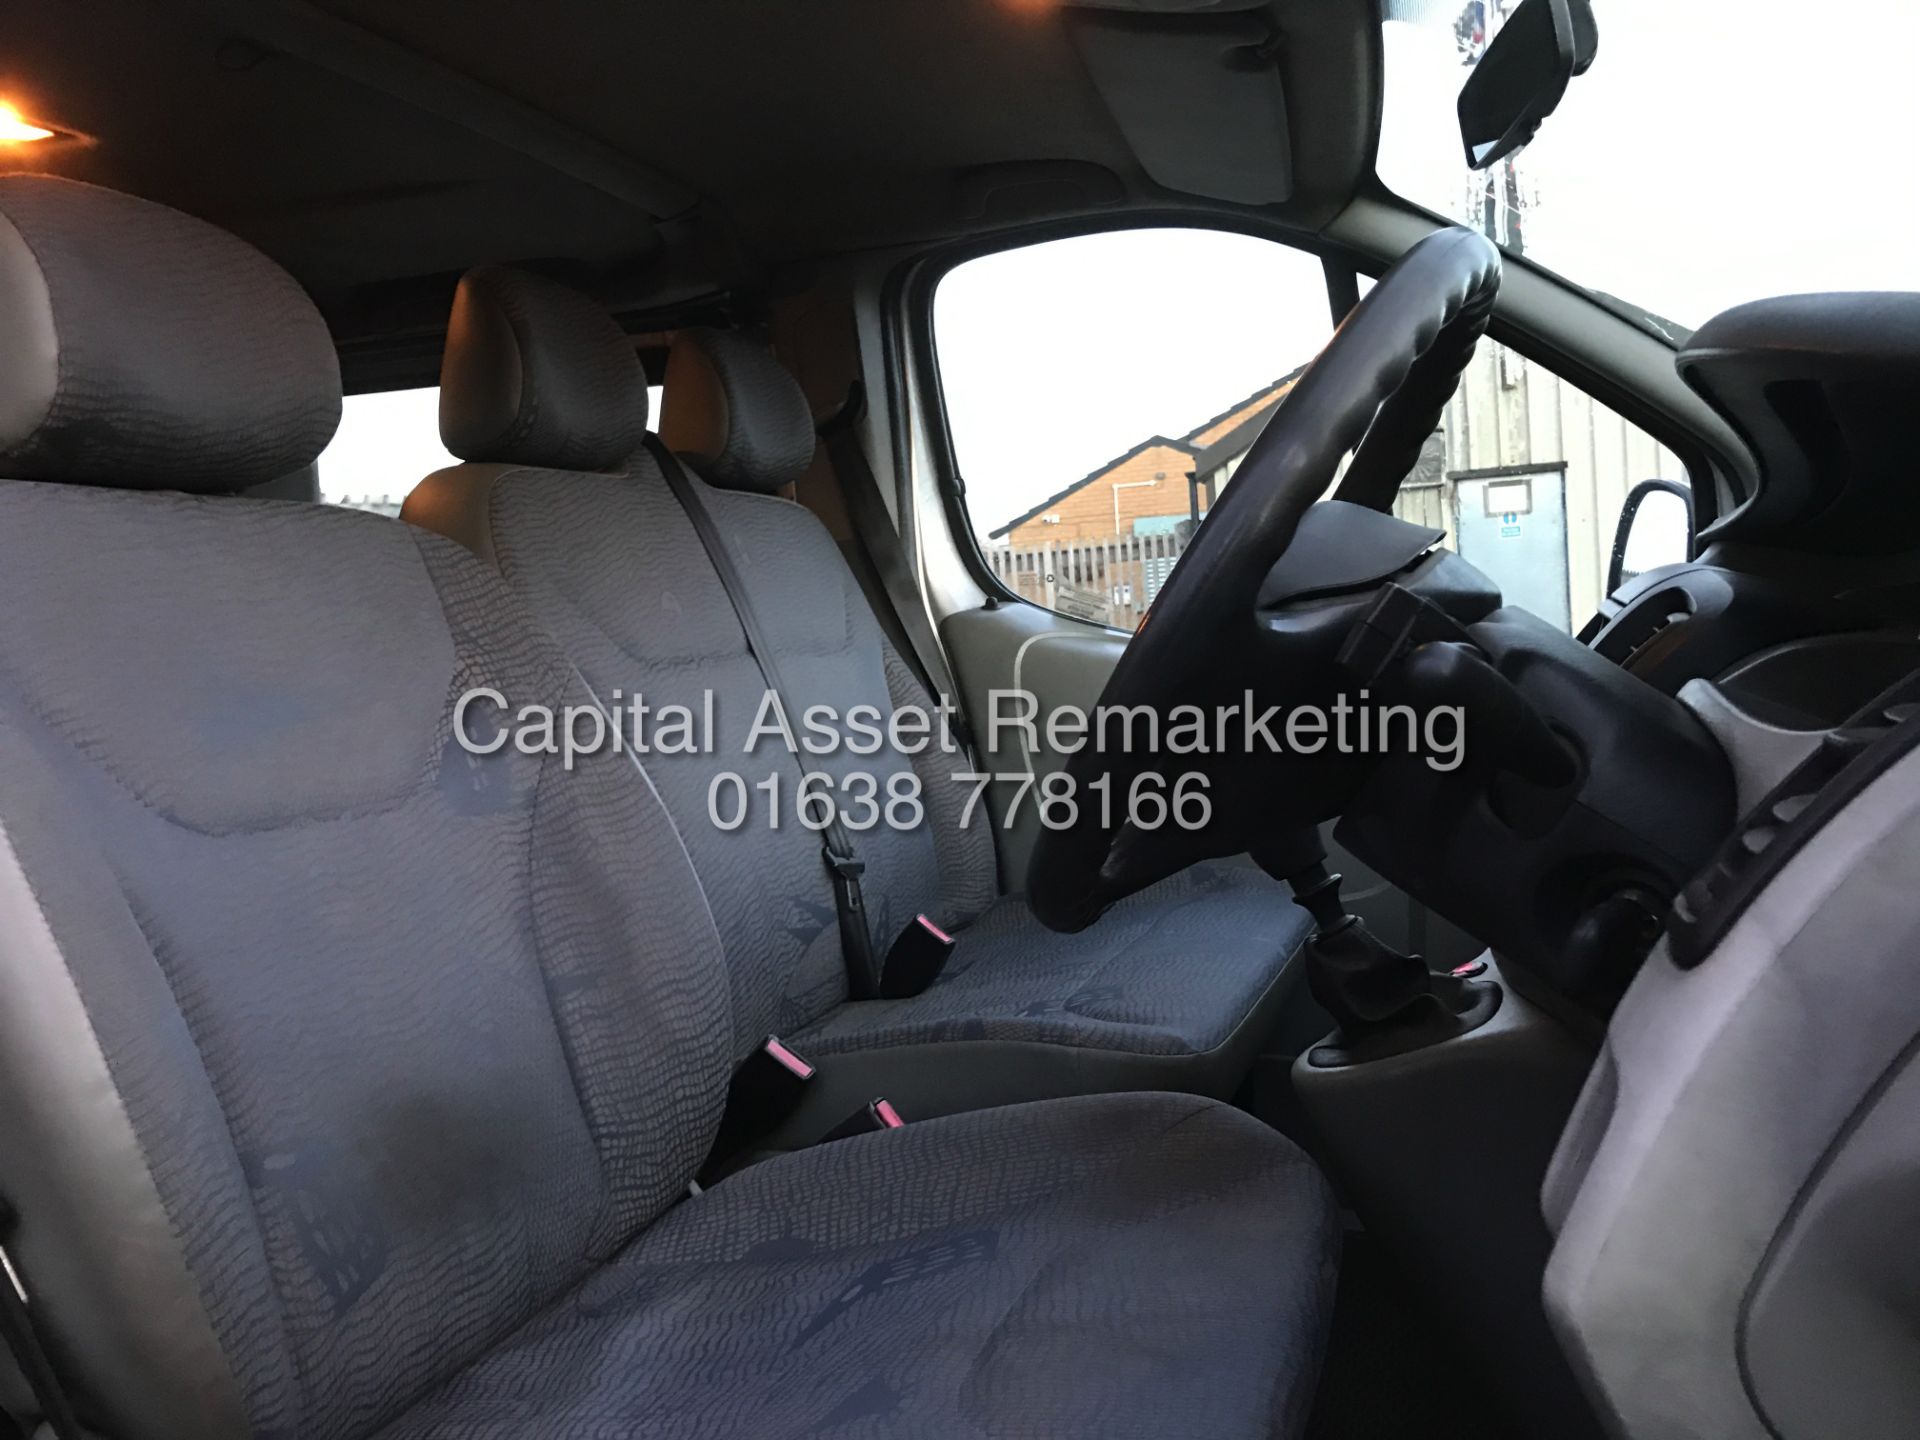 On Sale RENAULT TRAFIC 1.9DCI LONG WHEEL BASE DUELINER 6 SEATER - 05 REG - SILVER - AIR CON - WOW!!! - Image 9 of 19